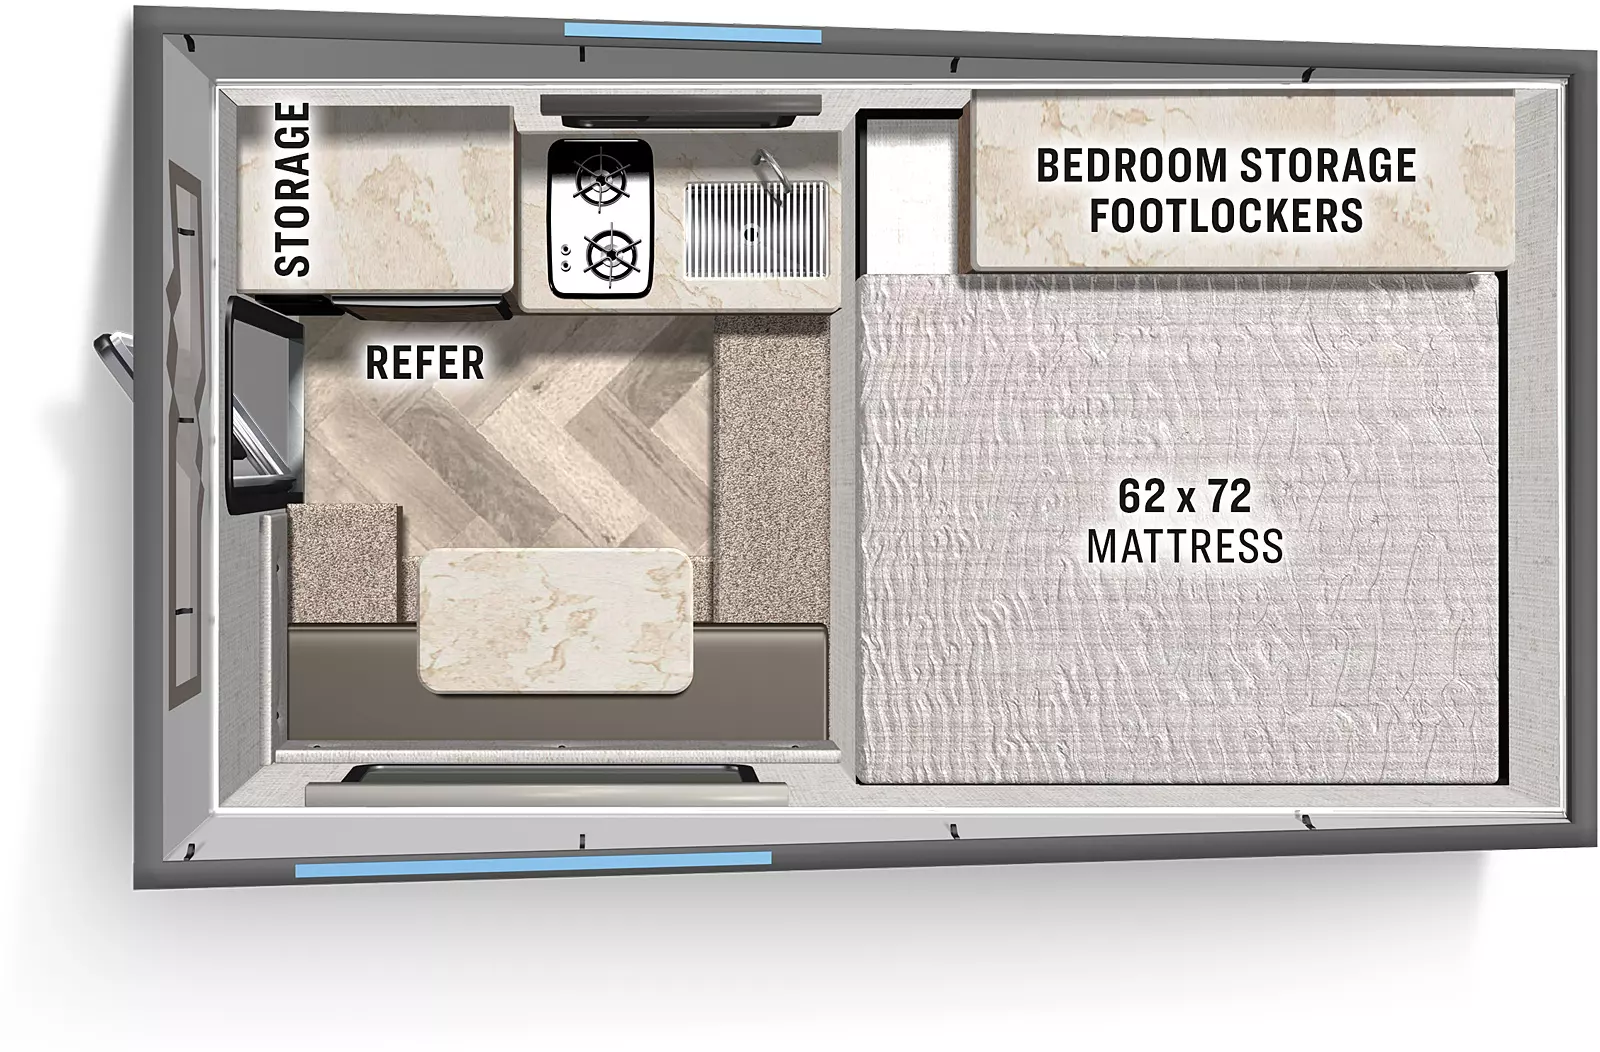 The Rouge EB-1 includes a rear entry door, storage closet, a refrigerator, cooktop, and sink in the kitchen; the bedroom area includes a 62 x 76 mattress and bedroom storage foot lockers; the dining area includes  wrap around dinette seating with a table. 